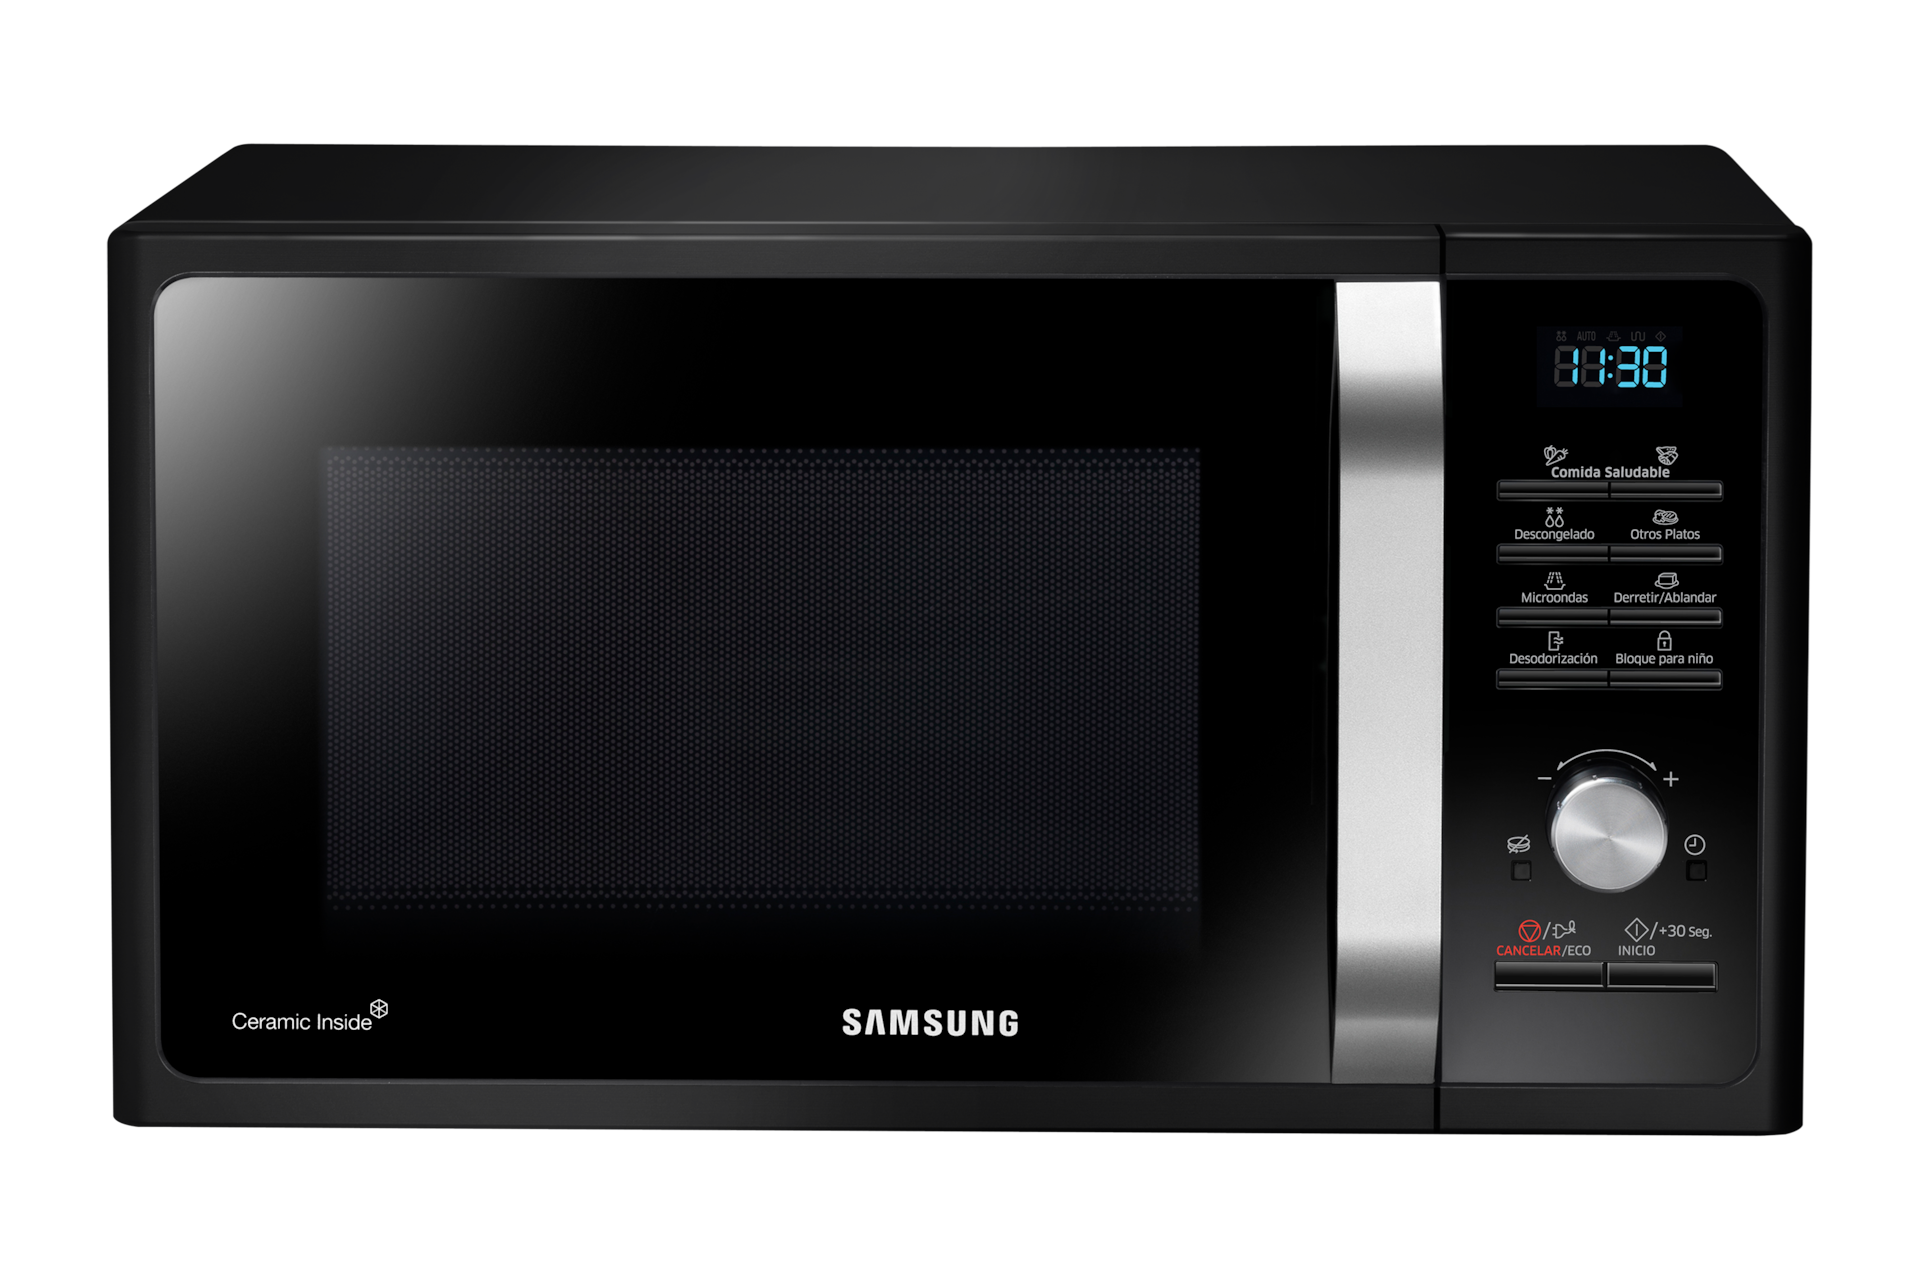 https://images.samsung.com/is/image/samsung/fr-microwave-oven-grill-mg28f303tfk-mg28f303tfk-ef-frontsilver-96932280?$650_519_PNG$